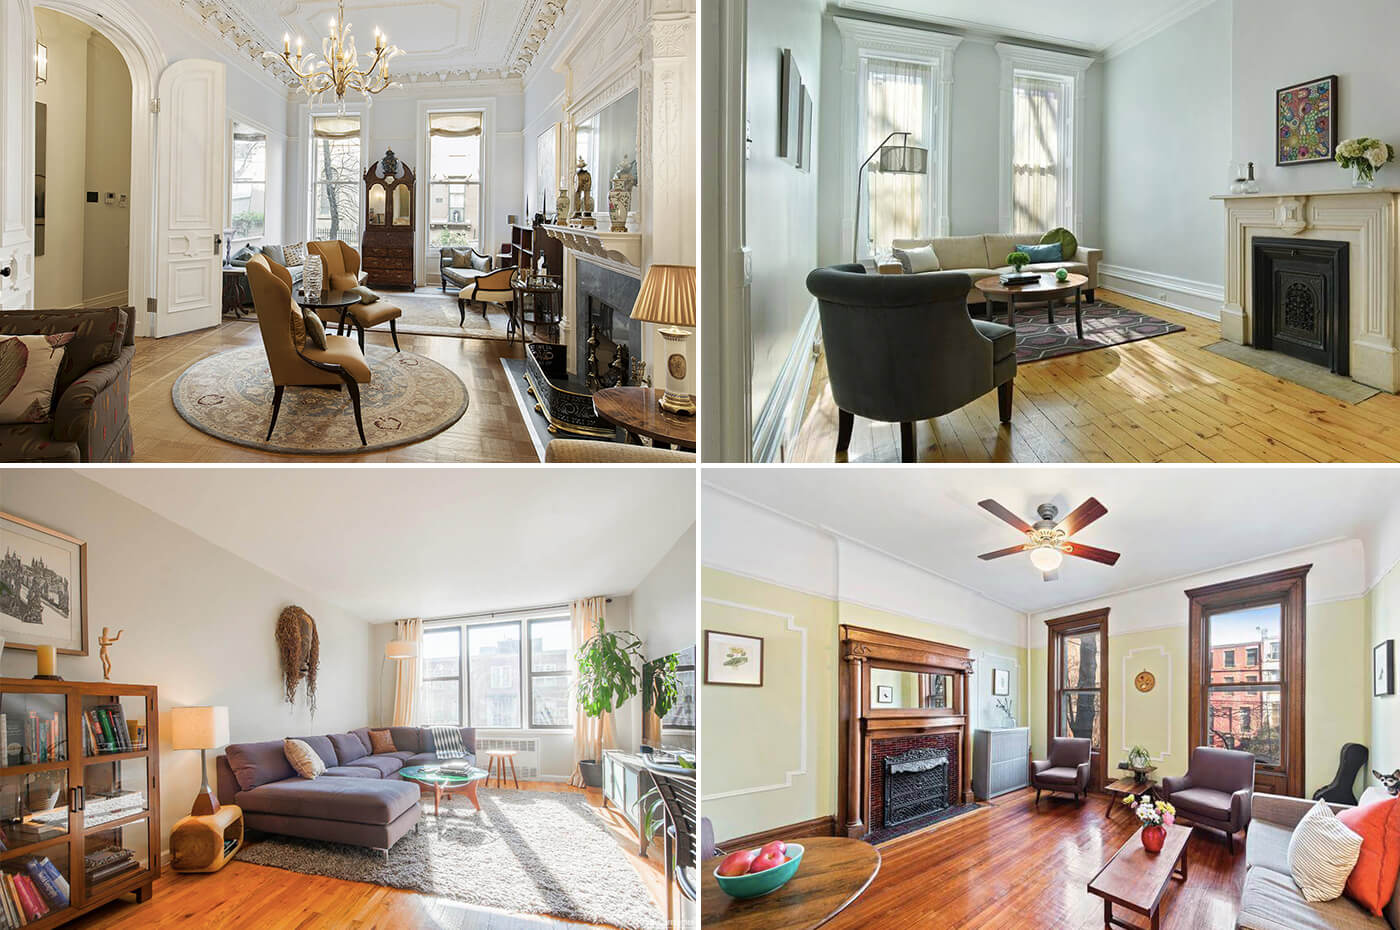 Brooklyn Homes for Sale Park Slope Brooklyn Heights Kensington Prospect Heights